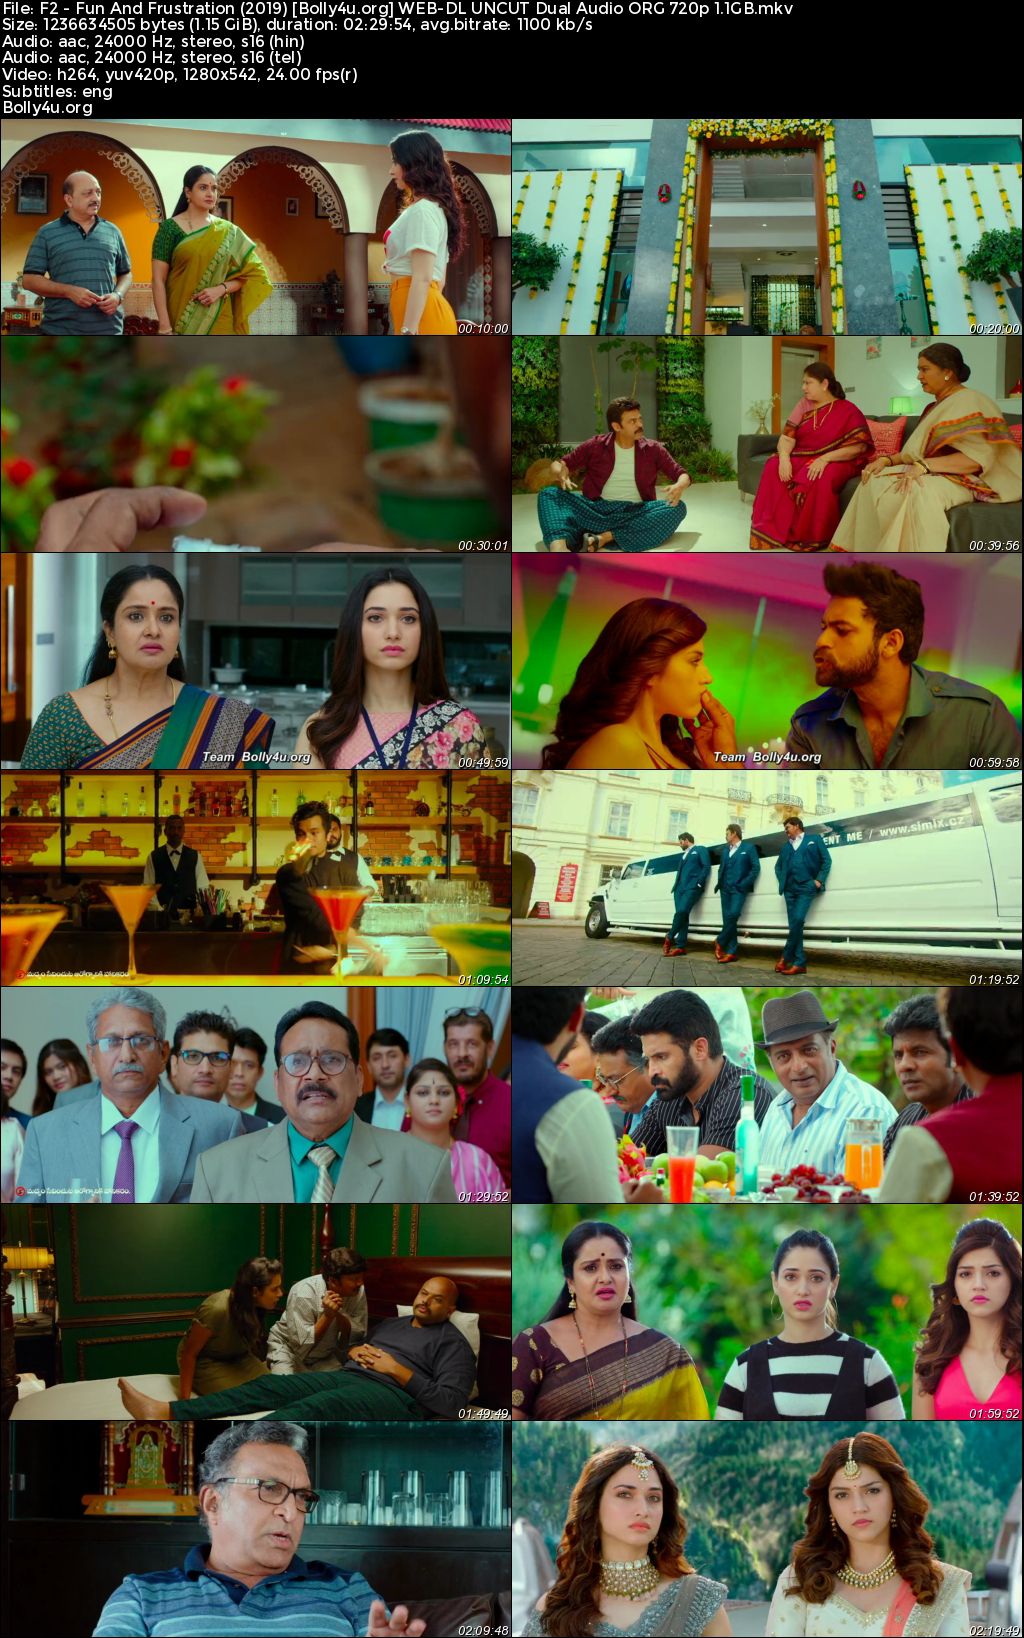 F2 Fun And Frustration 2019 WEB-DL UNCUT Hindi Dual Audio ORG Full Movie Download 1080p 720p 480p